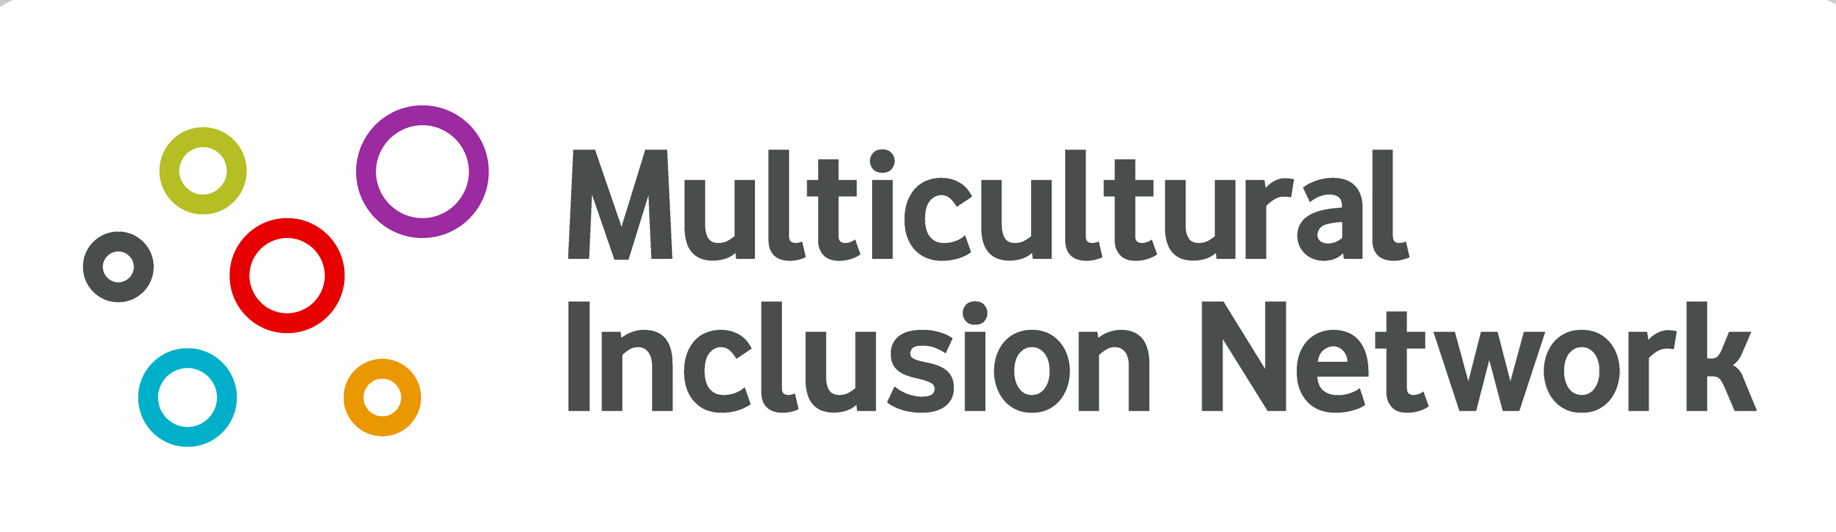 Multicultural Inclusion Network